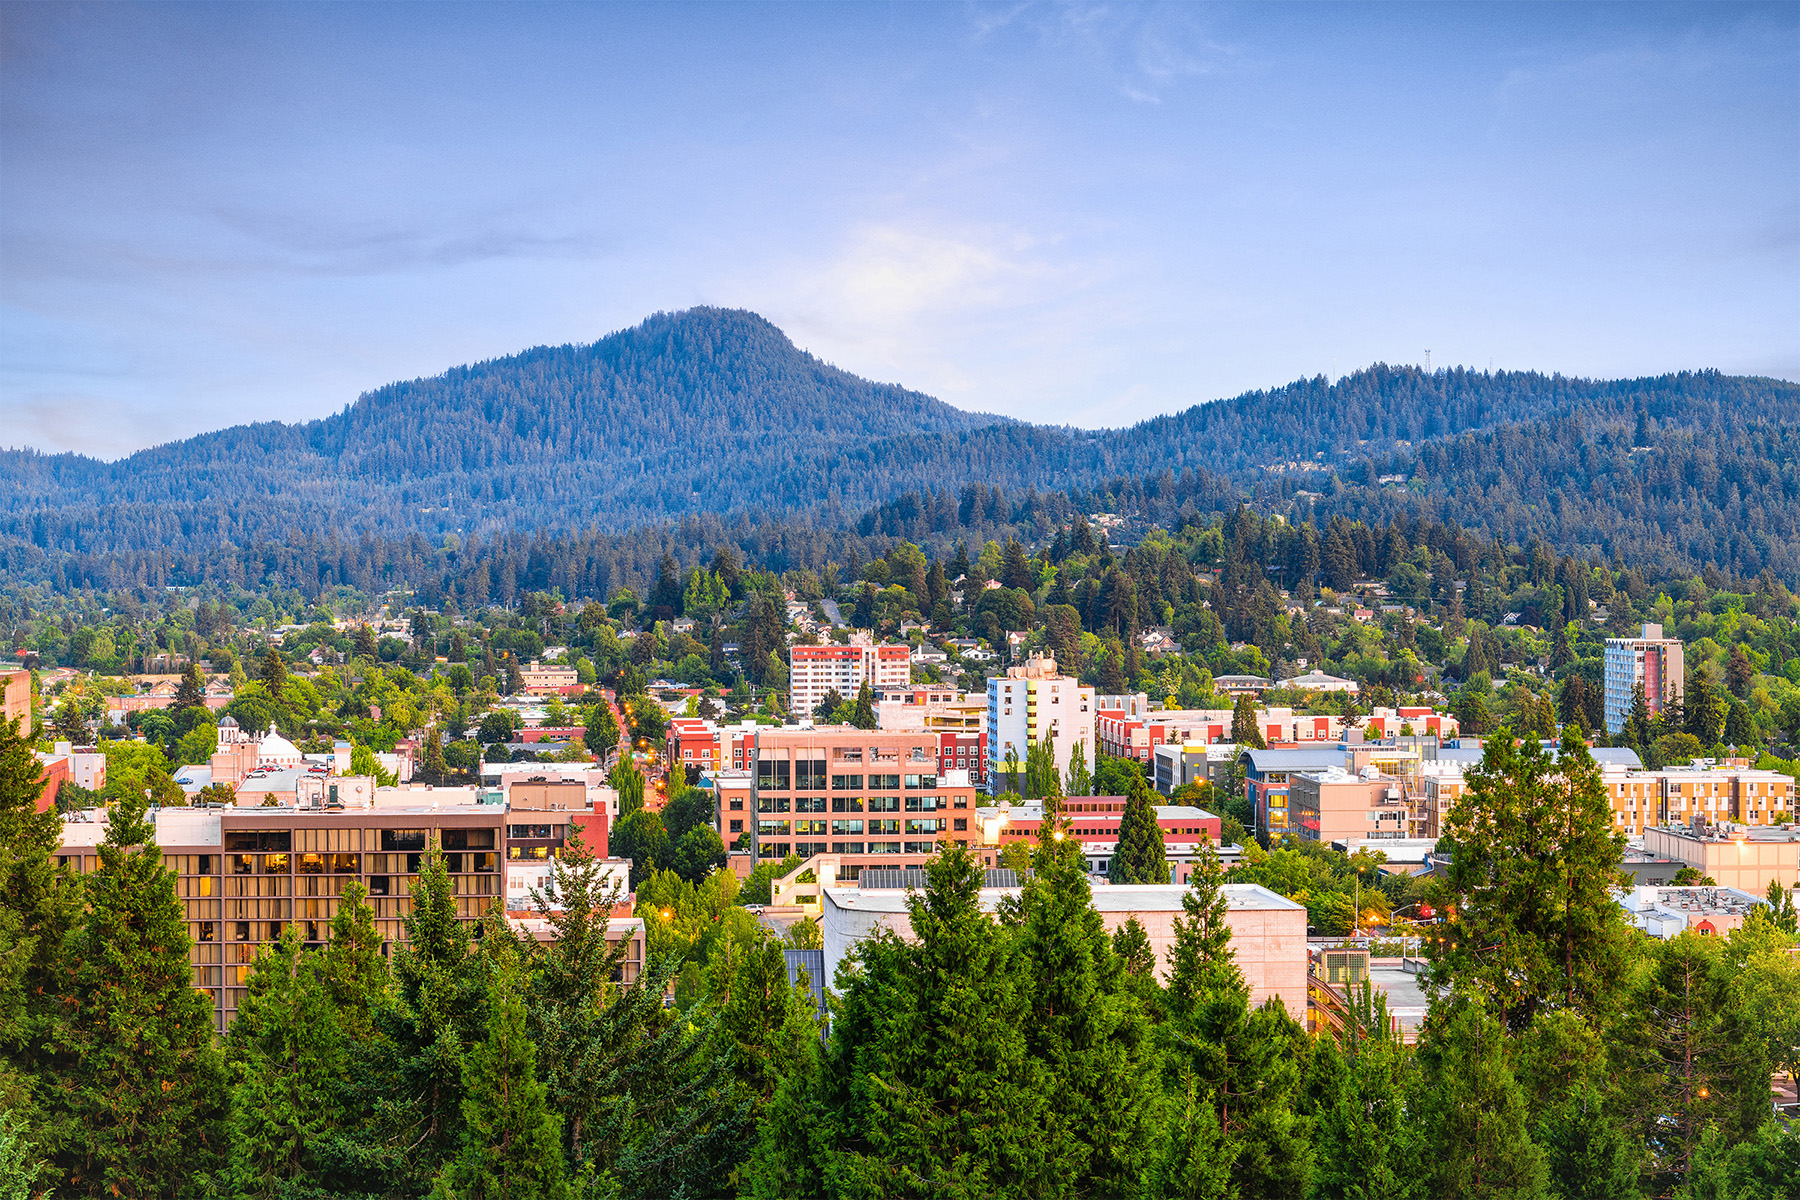 7. <strong>Eugene, Oregon</strong><br><strong>The skinny:</strong> 213% increase; Going carbon neutral next year, hosting national qualifiers for track and field<br><strong>Choicest digs:</strong> <a href="https://www.airbnb.com/rooms/631872?source_impression_id=p3_1572463333_u7Wx0I82zj00S0vy">Urban Whiteaker Cottage</a>